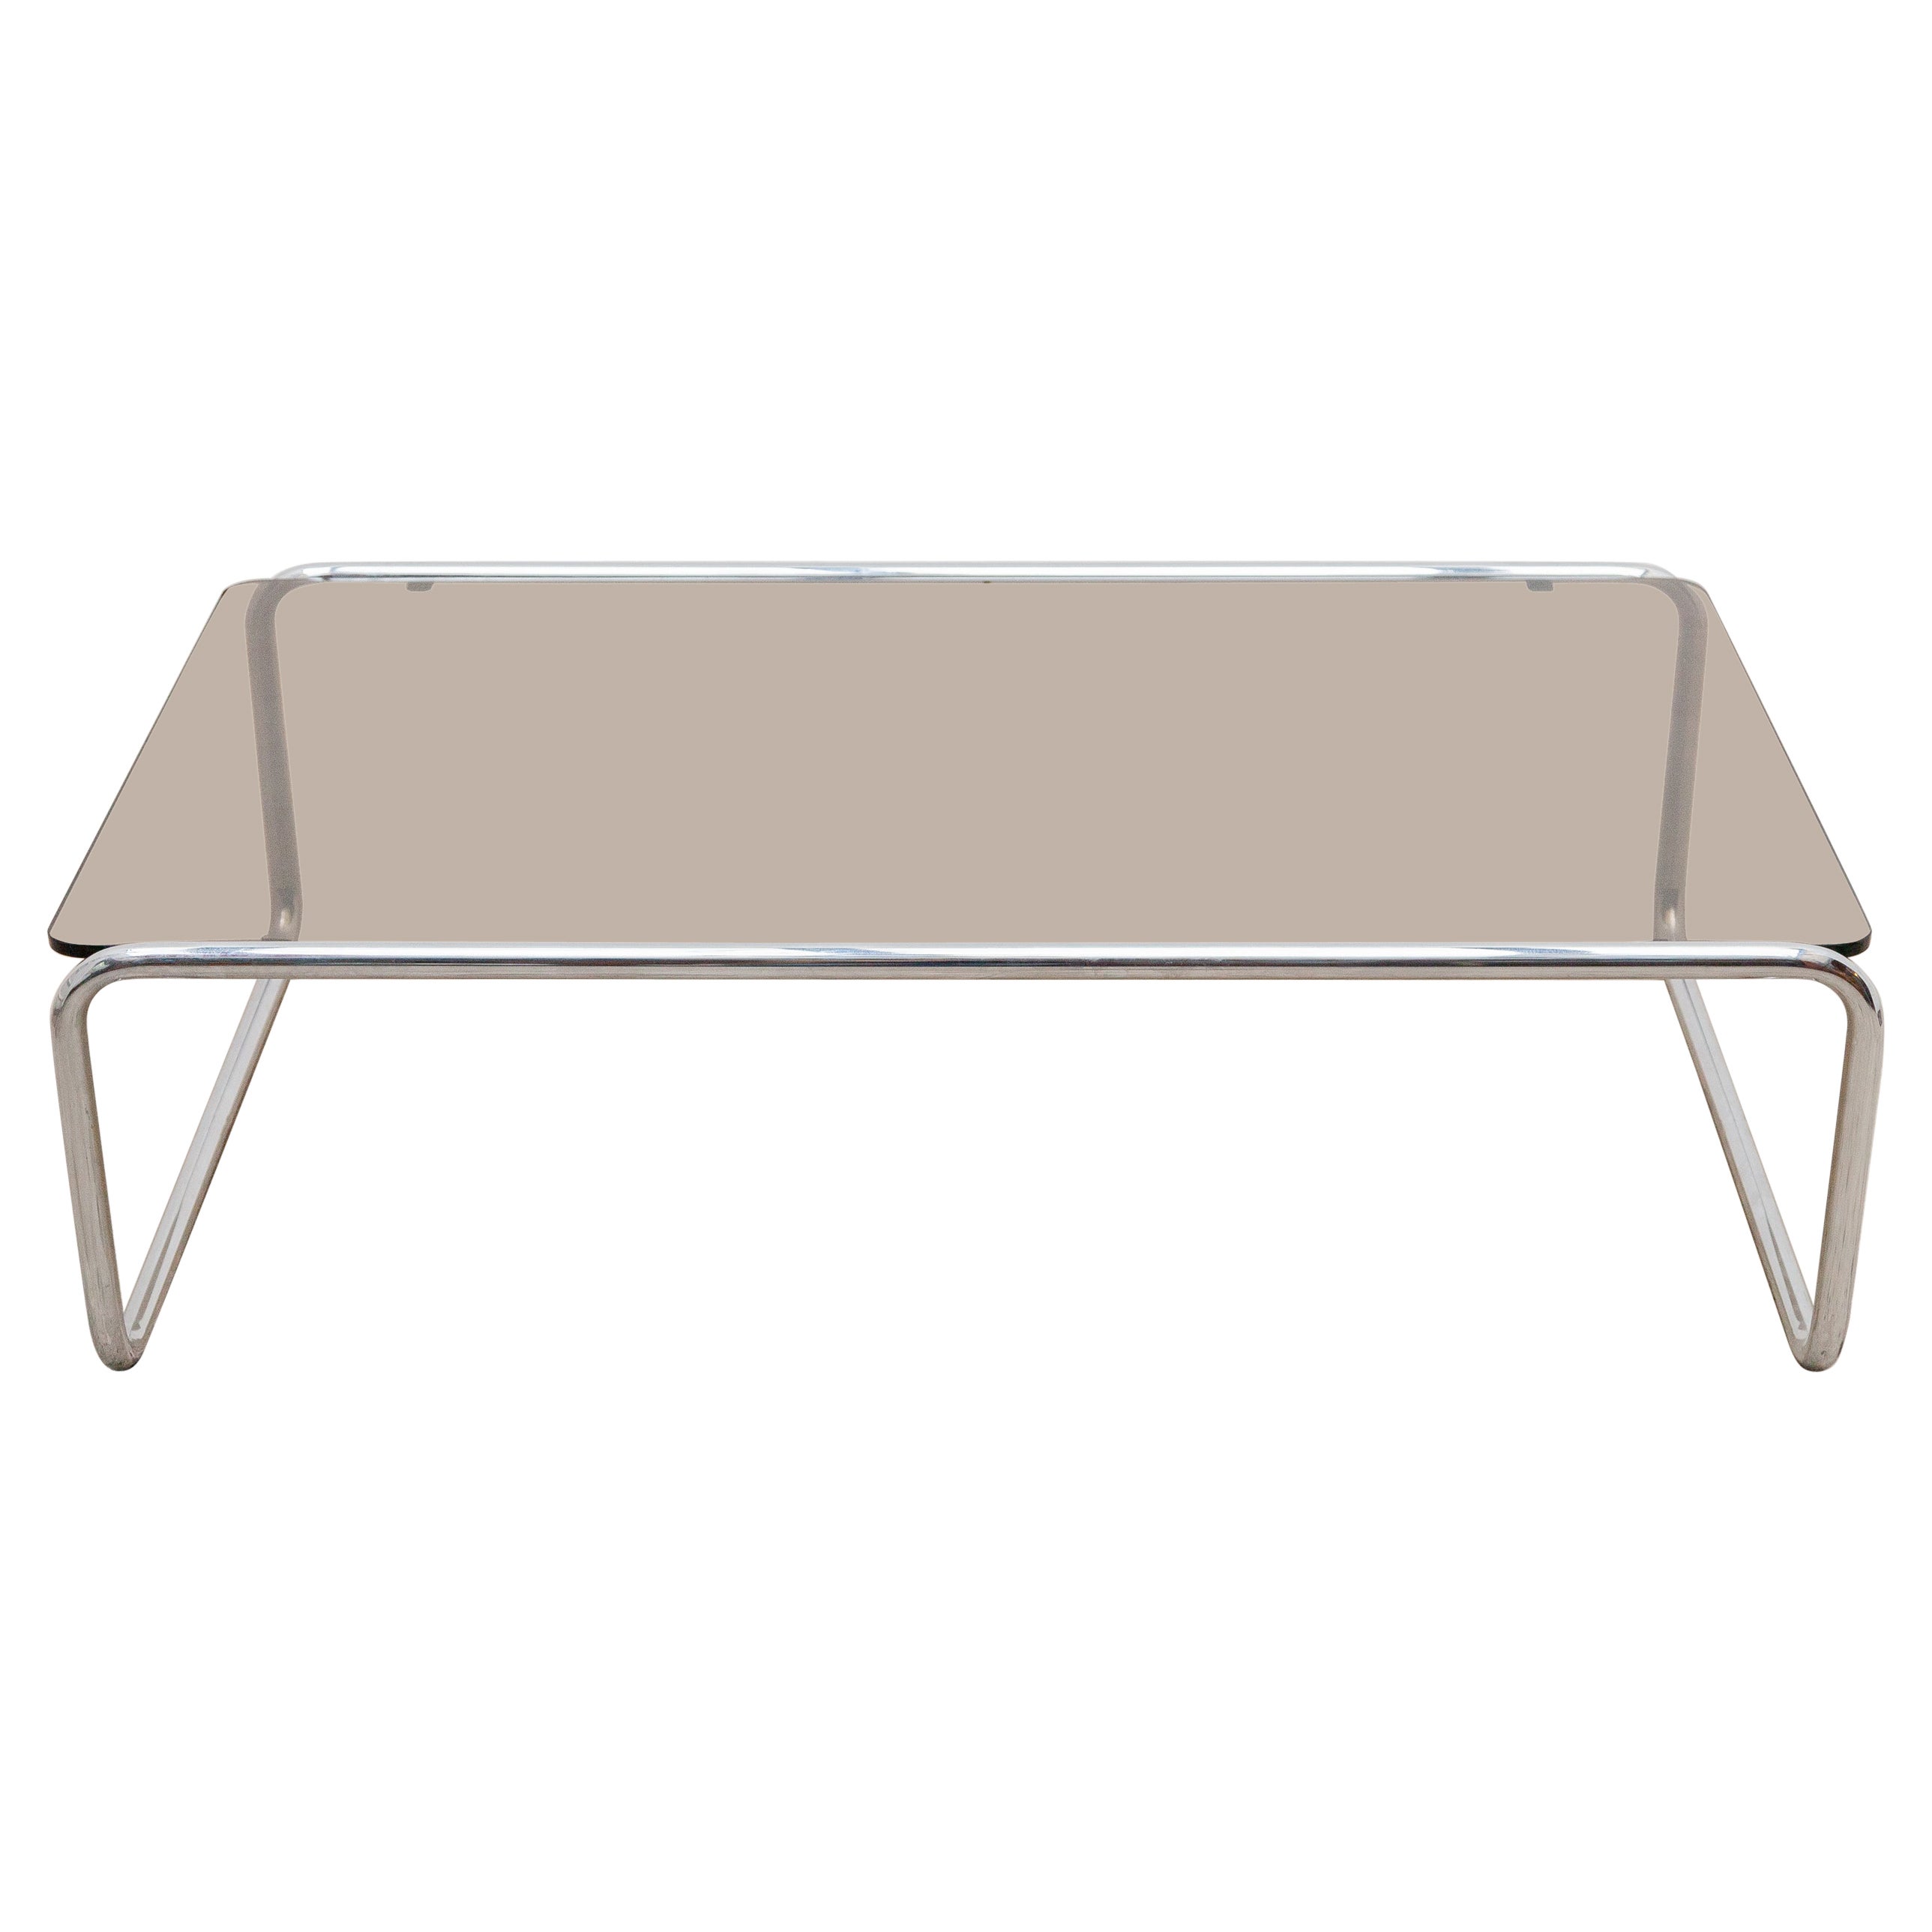 Thonet Chromed Metal and Smoked Glass Coffee Table, 1970s in Bauhaus Style